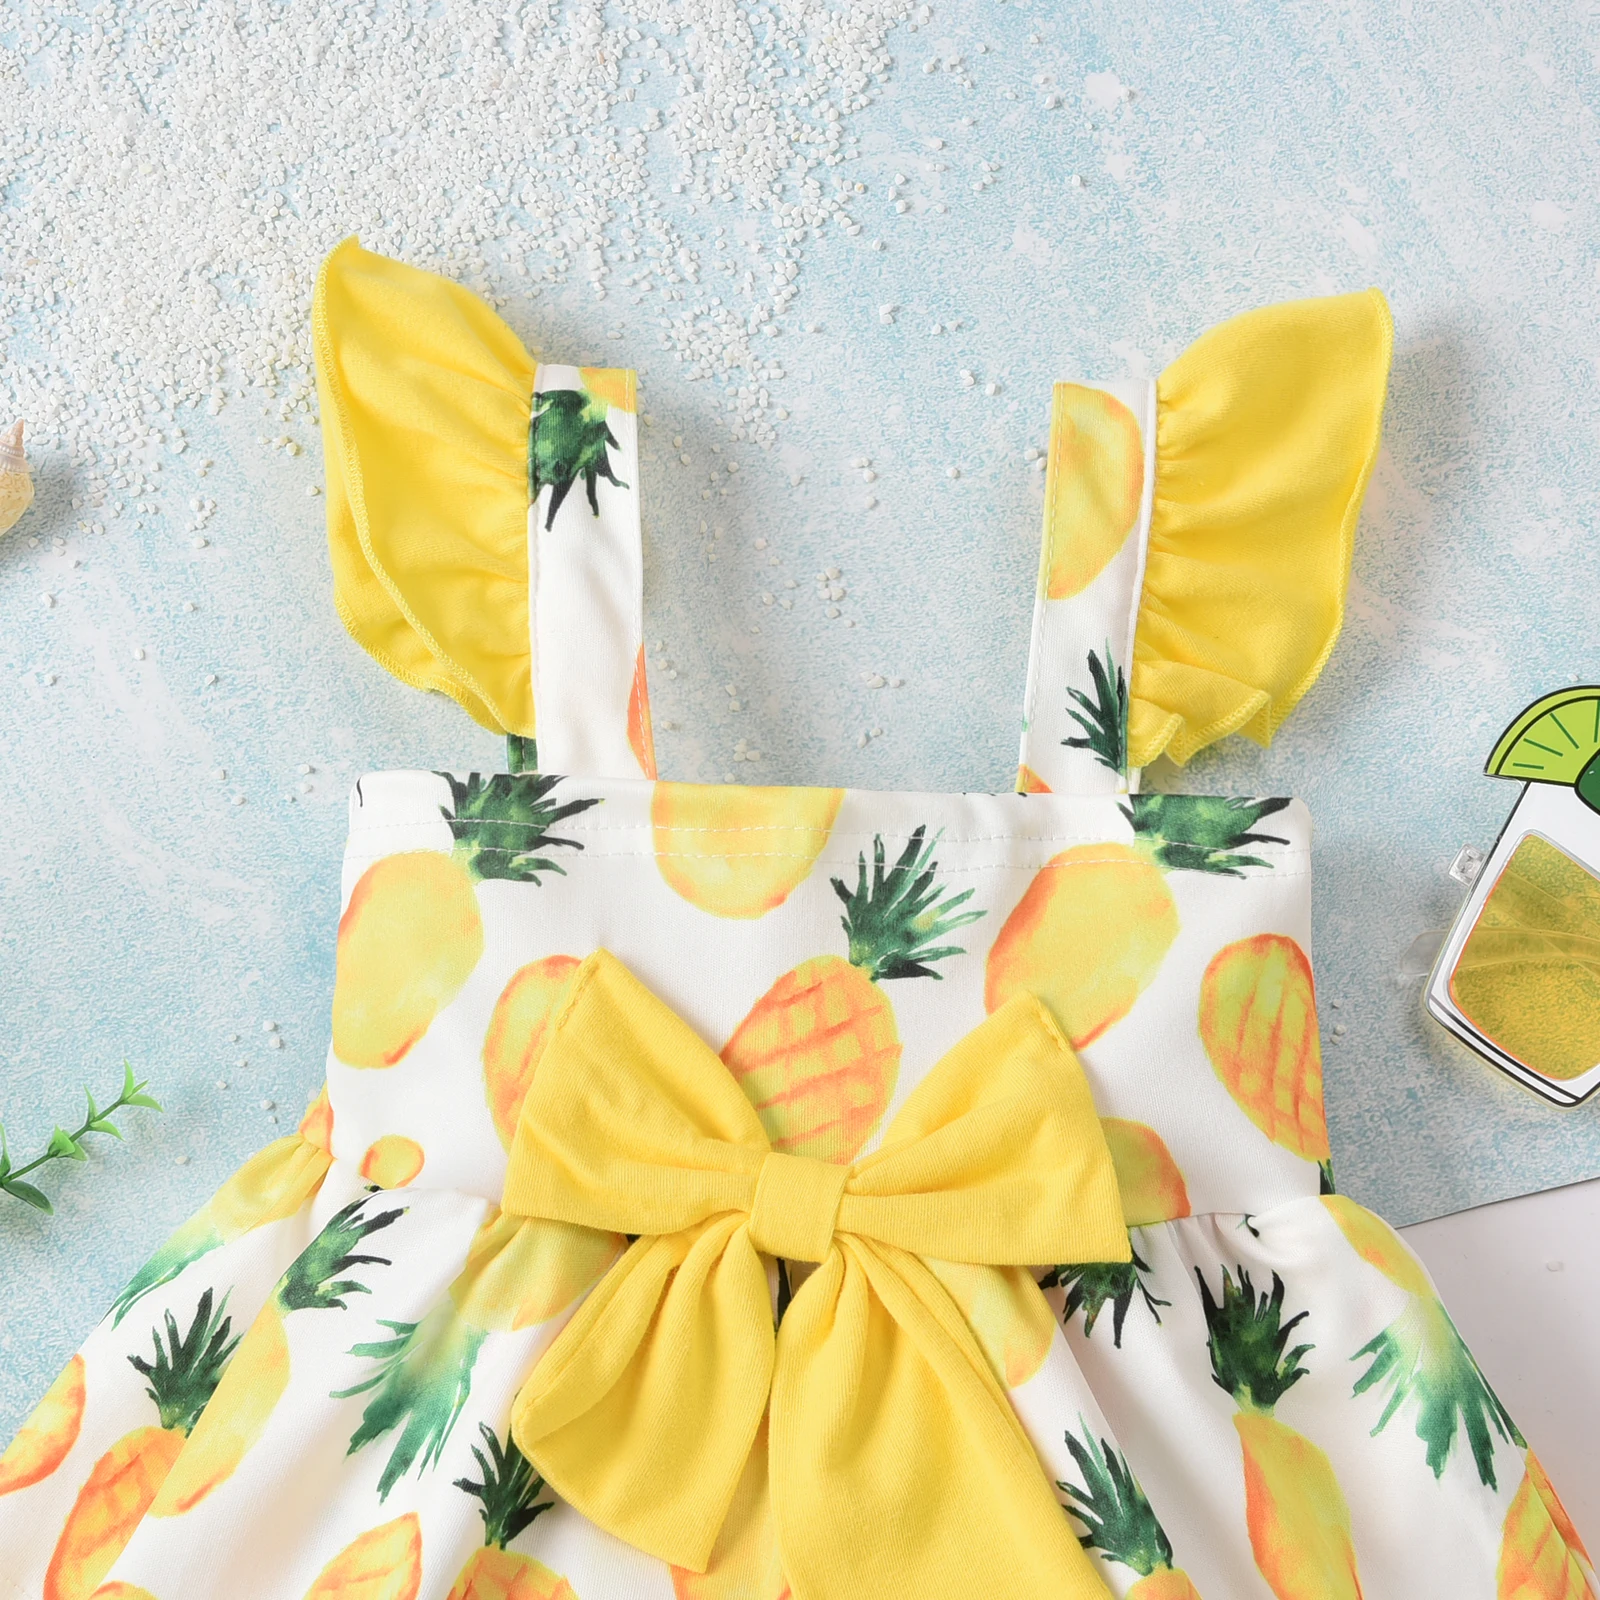 Summer Baby Girls Lovely Rompers 0-12M Flowers/Fruit Printed Ruffles Short Sleeve Big Bowknot Jumpsuits Baby Bodysuits cheap